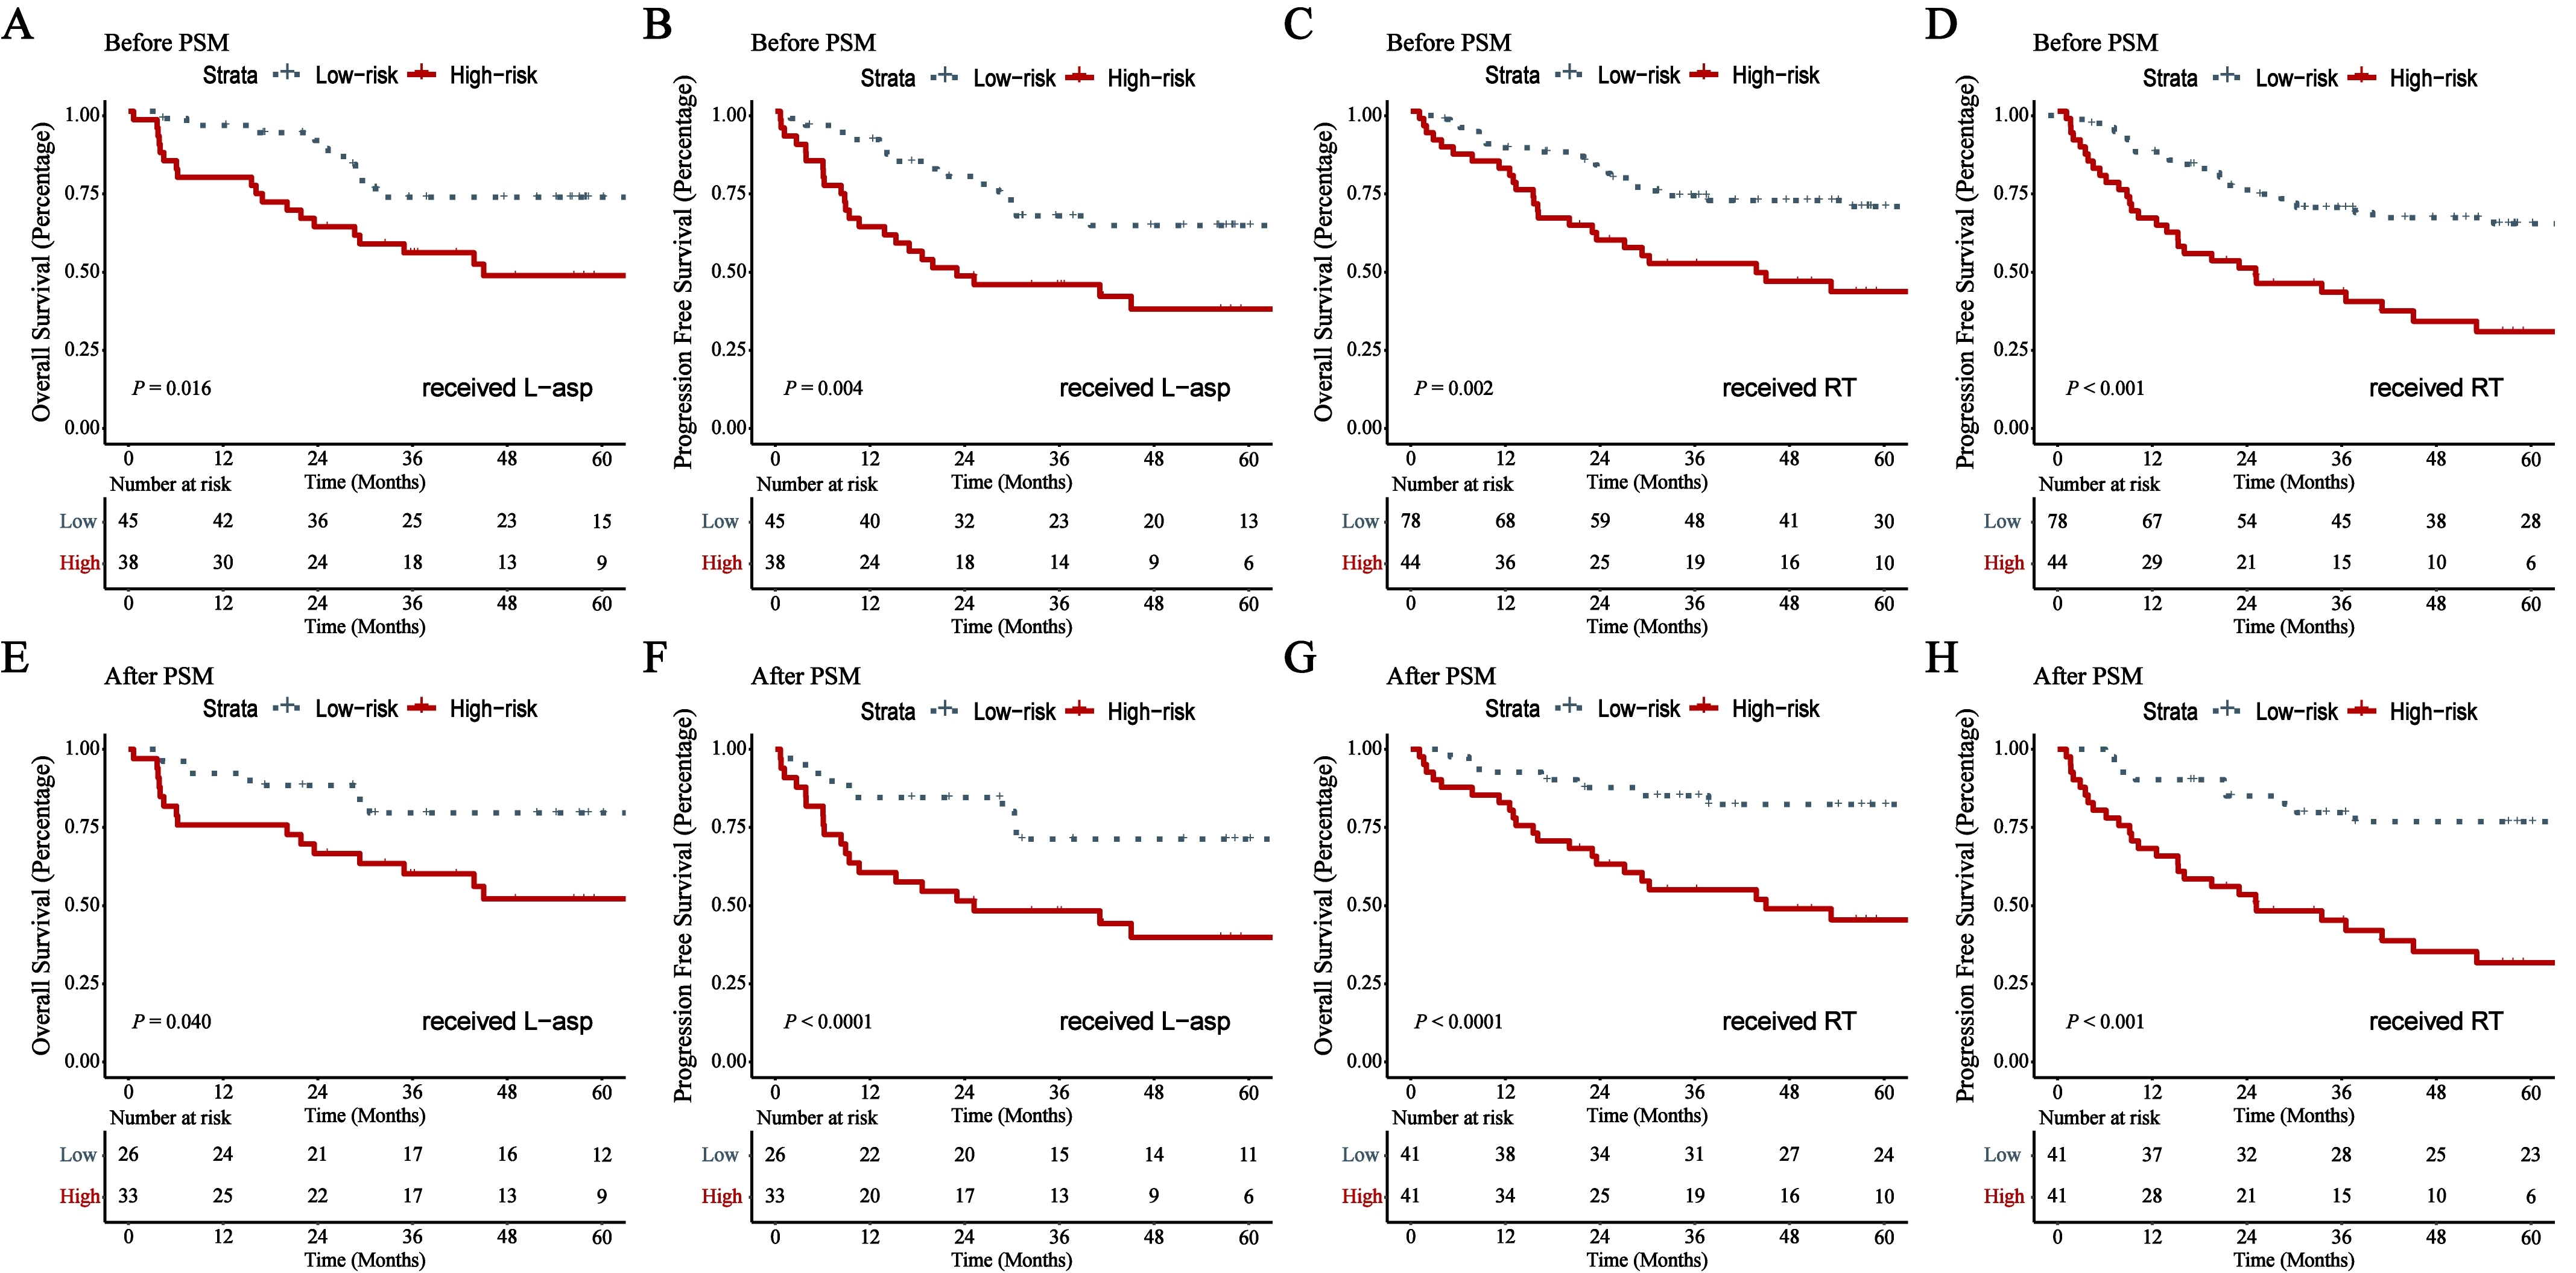 The survival curves of OS and PFS for high- and low-risk patients who received L-asp before (A, B) and after PSM (E, F); The survival curves of OS and PFS for high- and low-risk patients who received RT before (C, D) and after PSM (G, H).